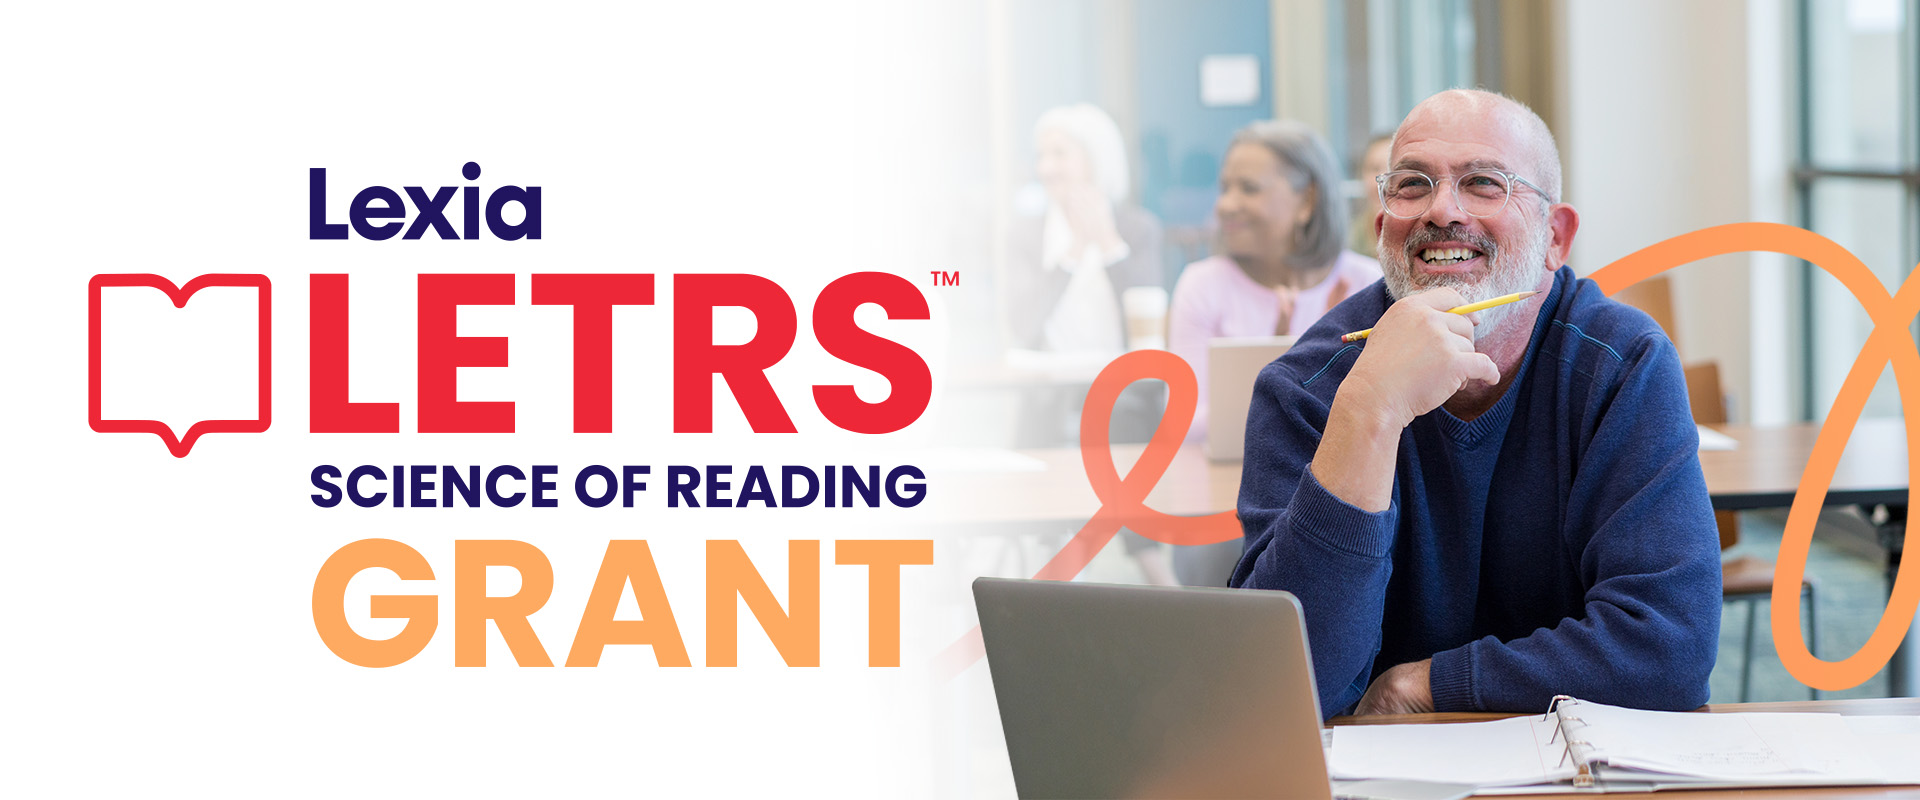 LETRS Science of Reading Grant